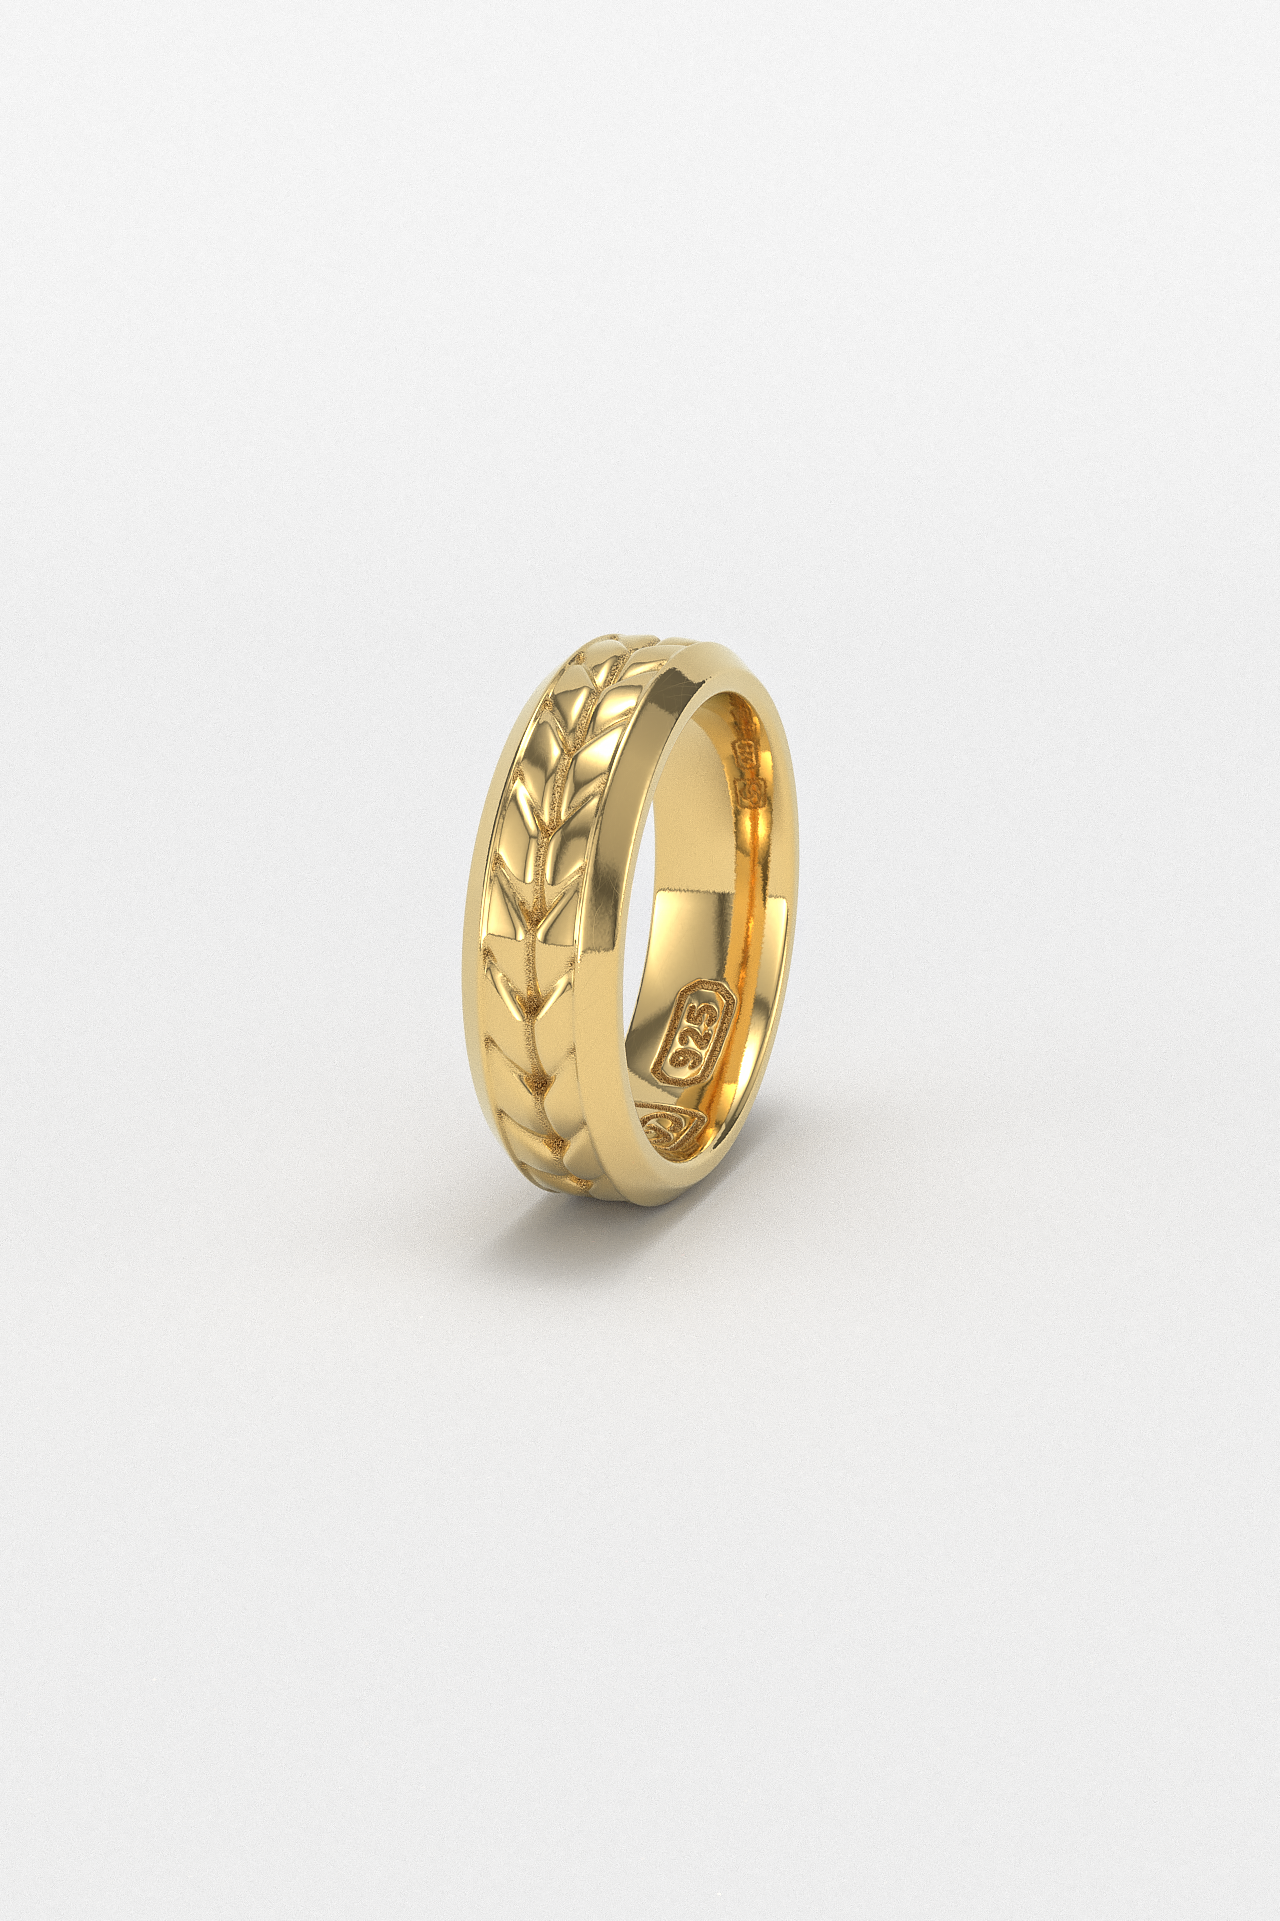 Woven Ring #2